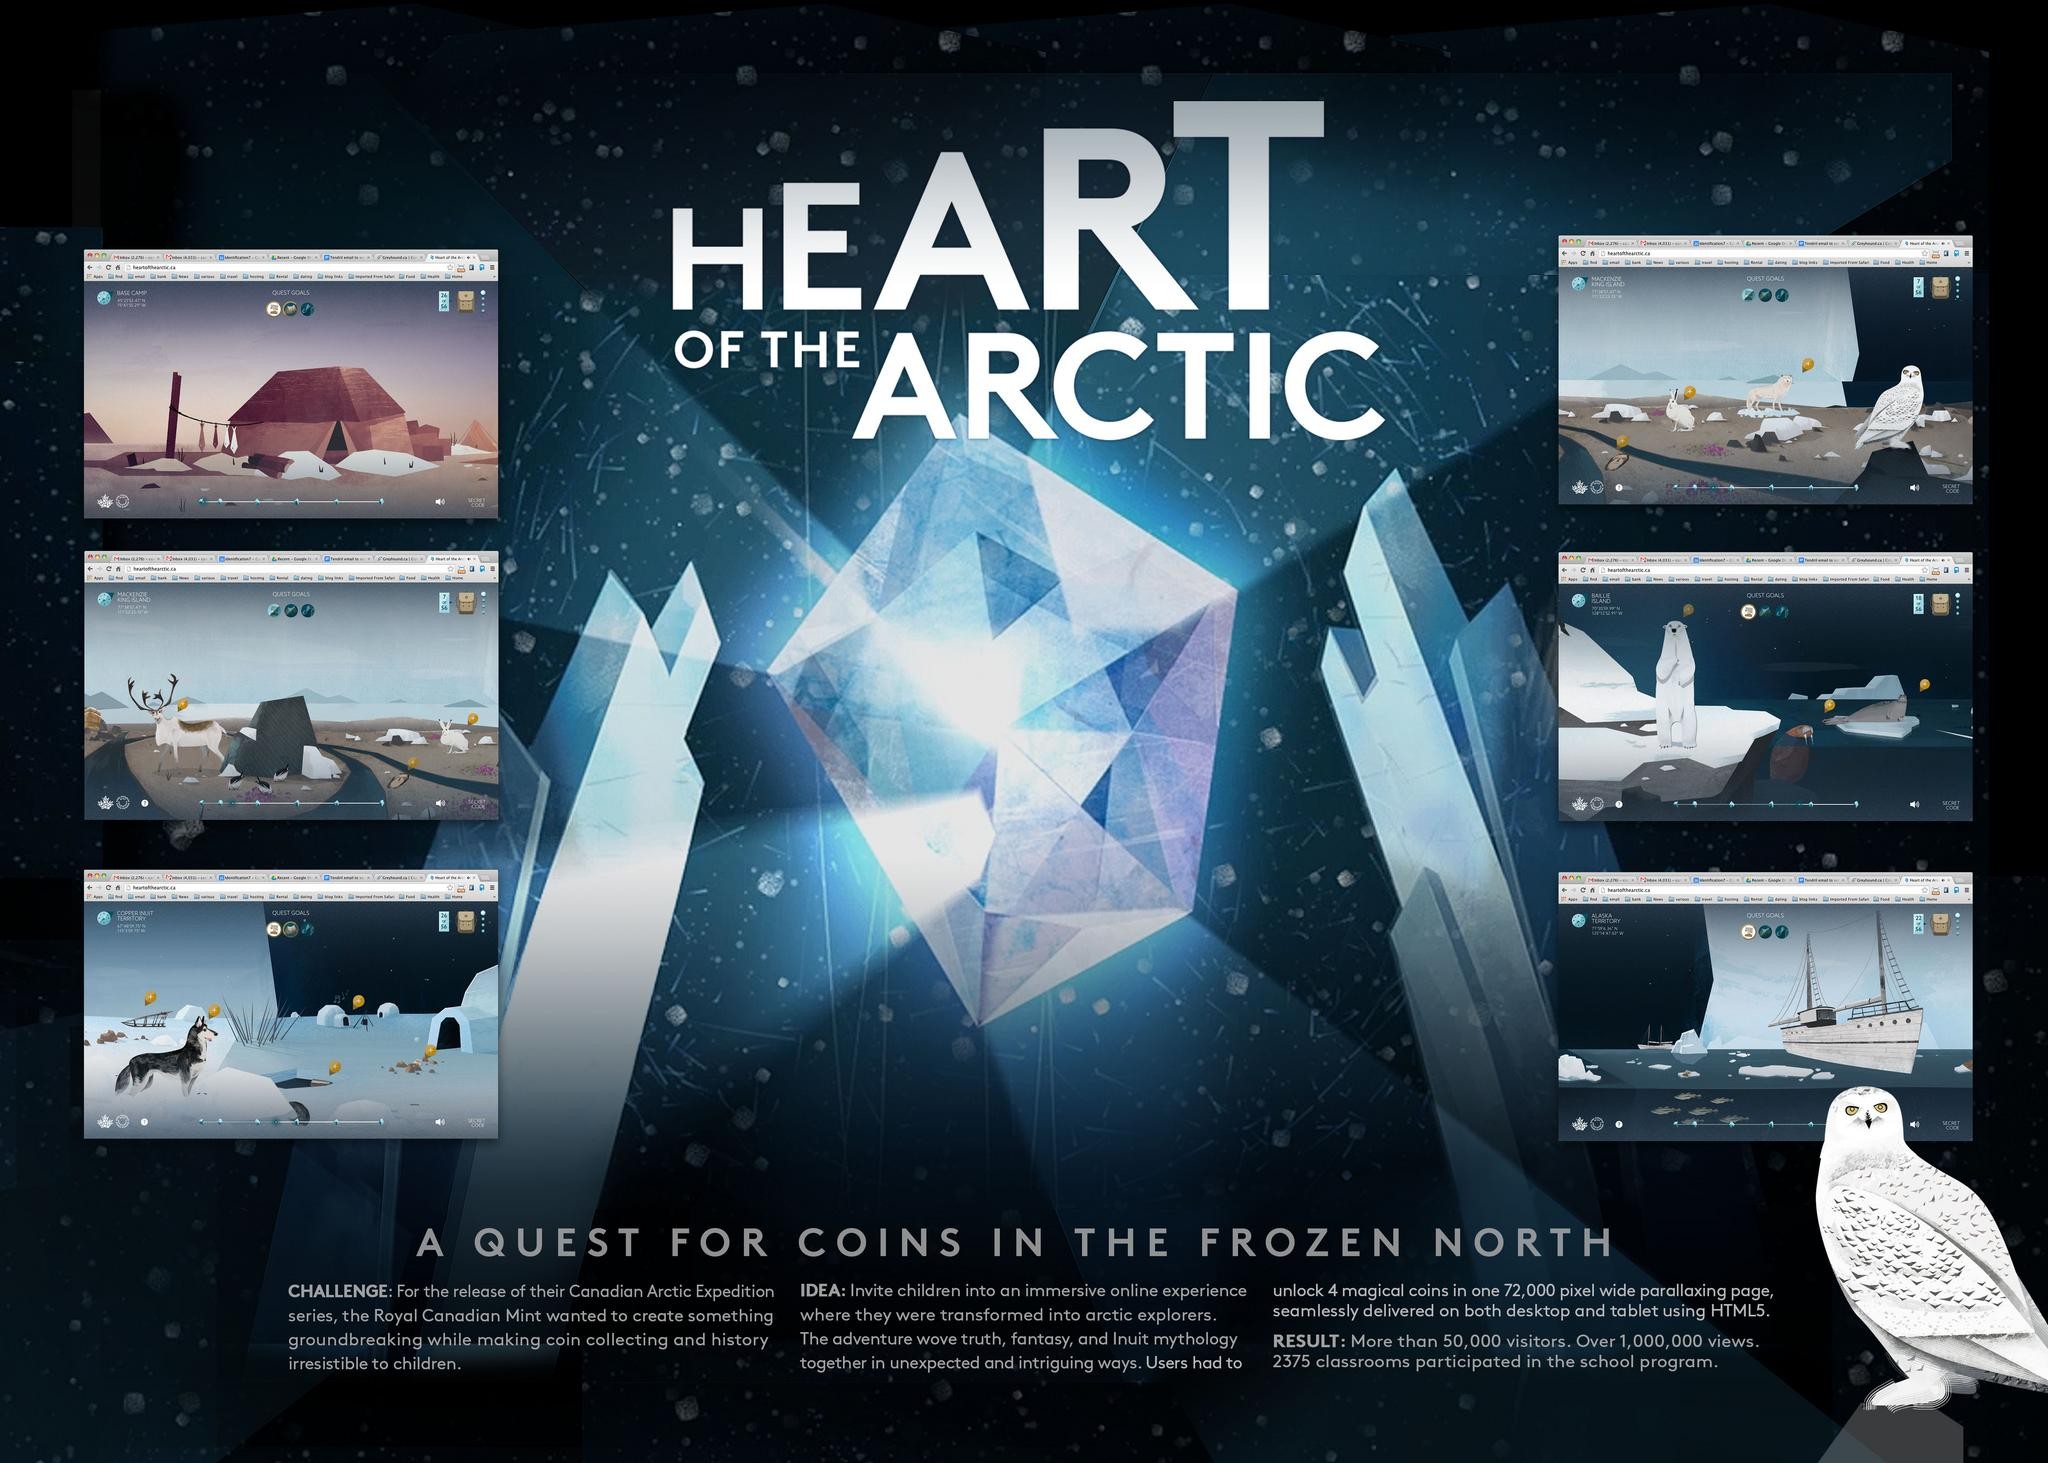 HEART OF THE ARCTIC